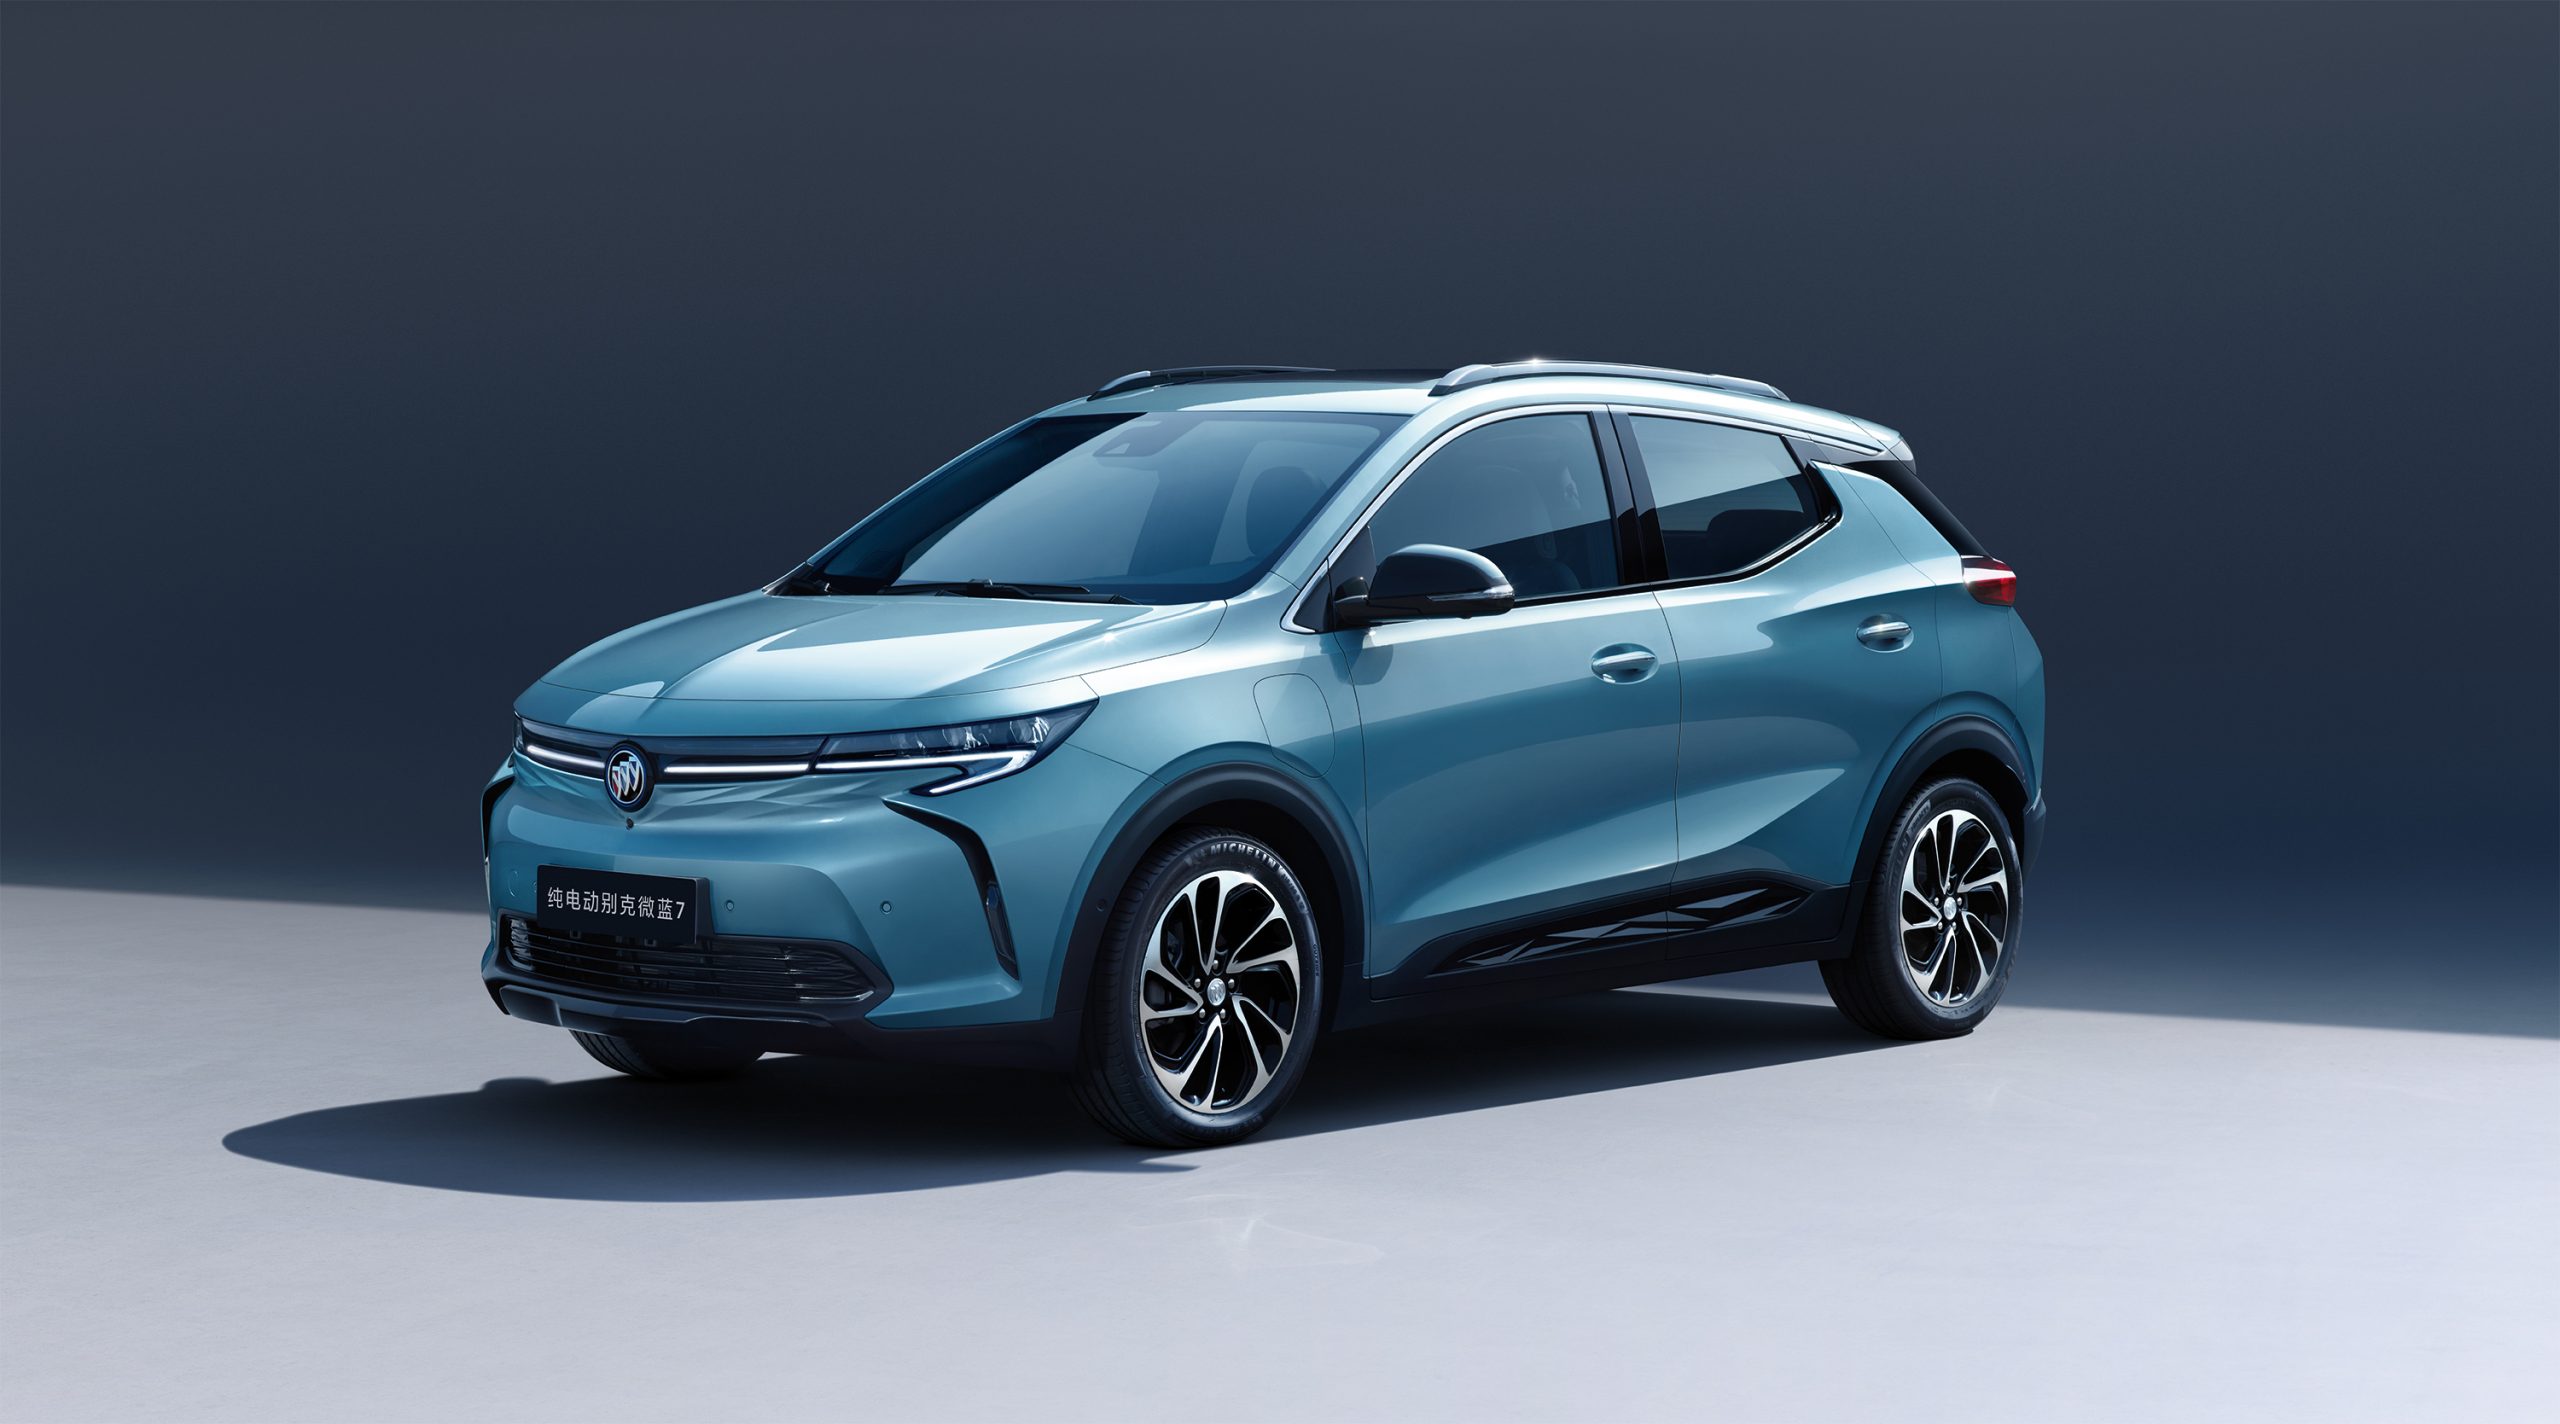 Starting at 179,800 yuan, Buick's first all-electric SUV, the Velite 7, was launched.